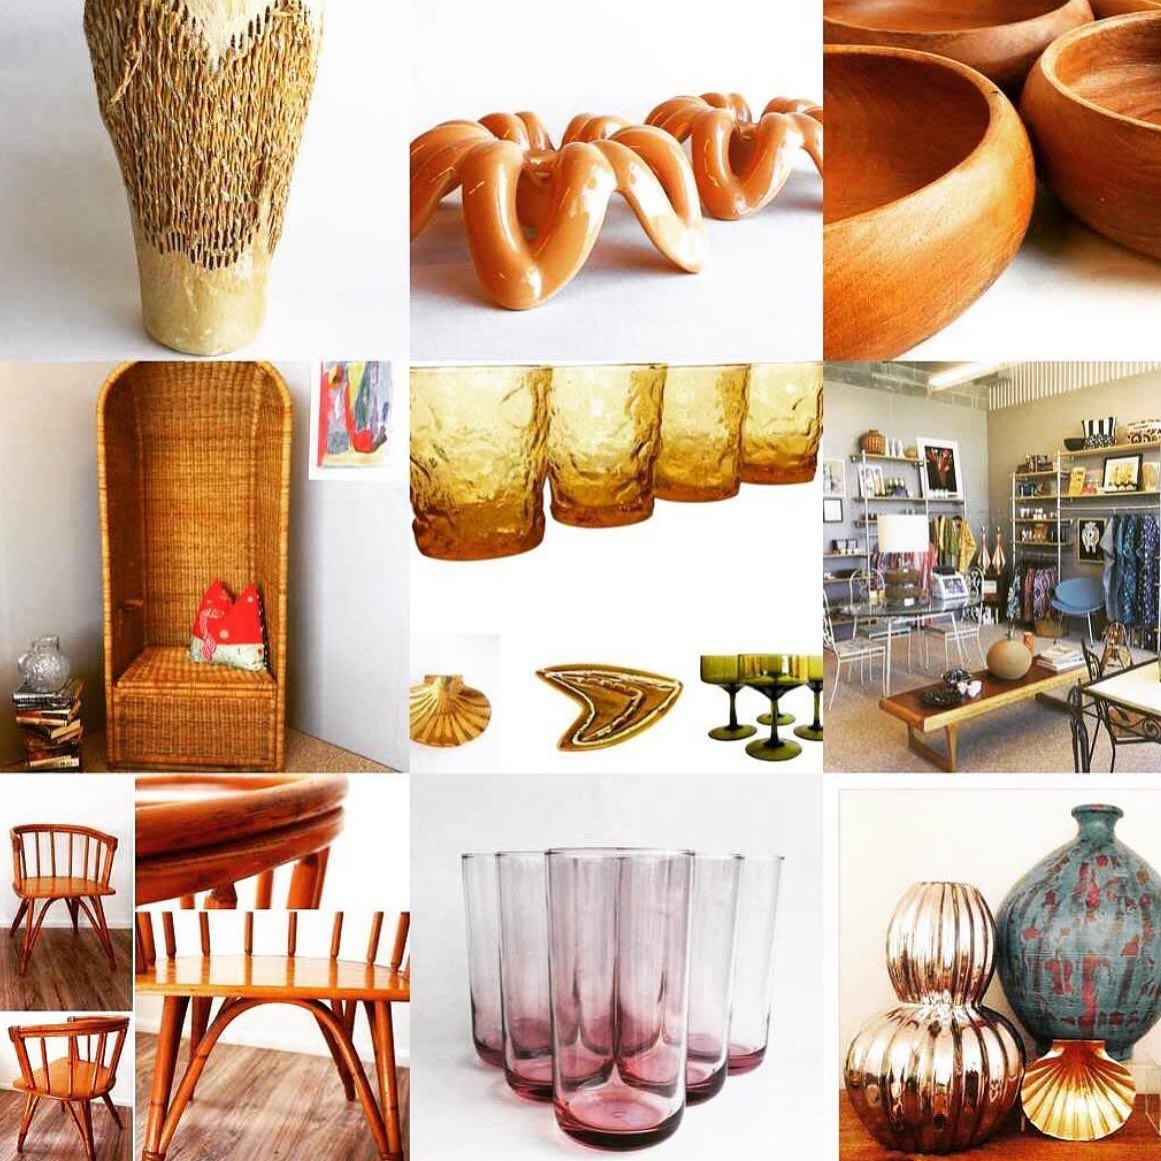 HAPPY TO WELCOME BACK @themobelbutik WITH HER LOVELY EYE FOR COLLECTIBLES &amp; HOUSEWARES🥂
SEE YOU MAY 19TH! 

The Baltimore Vintage Expo is a highly curated one-day-only event celebrating the thriving community of exclusively vintage &amp; antique